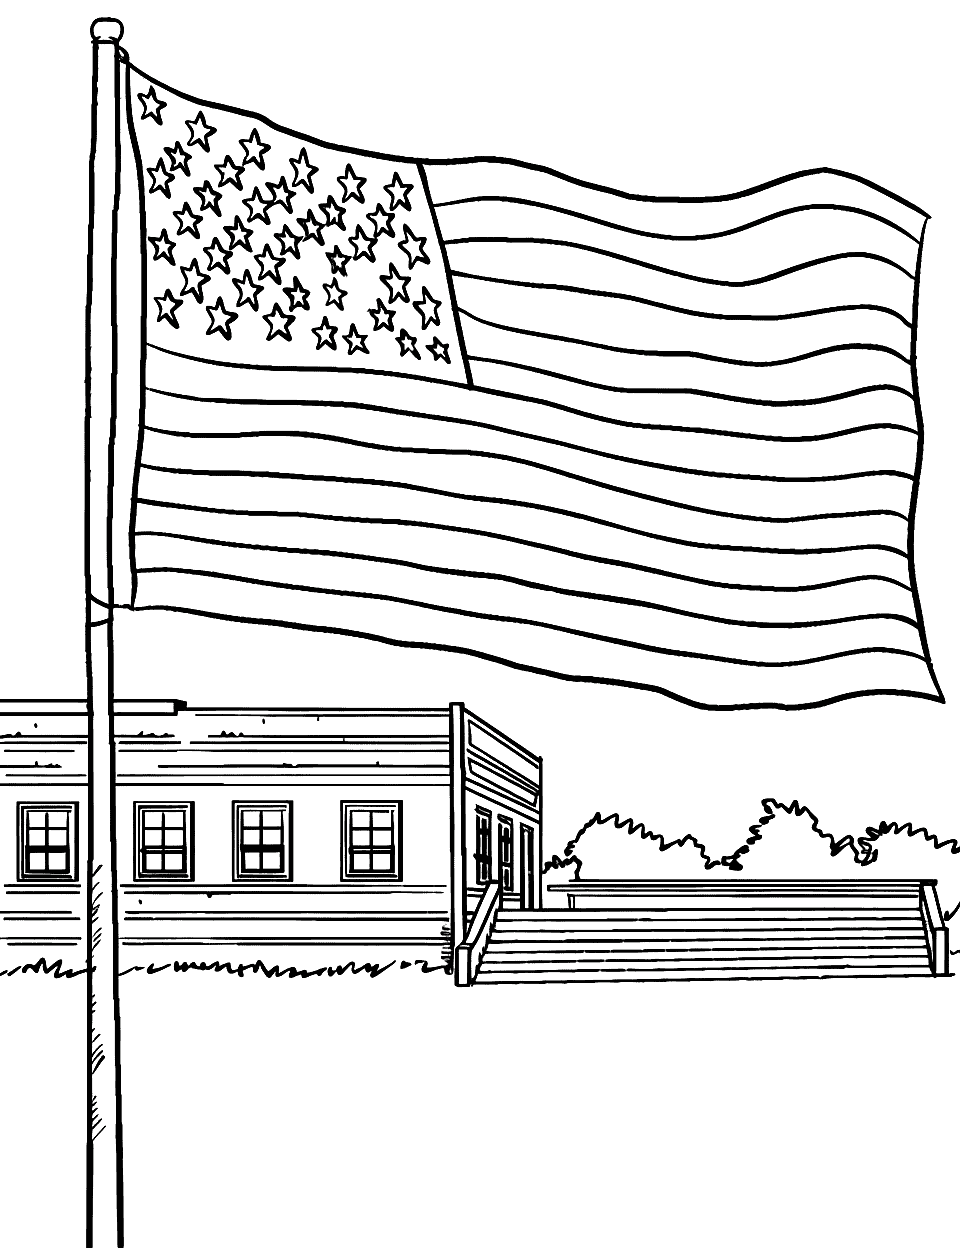 American Flag at School Coloring Page - An American flag flying high in front of a school building.